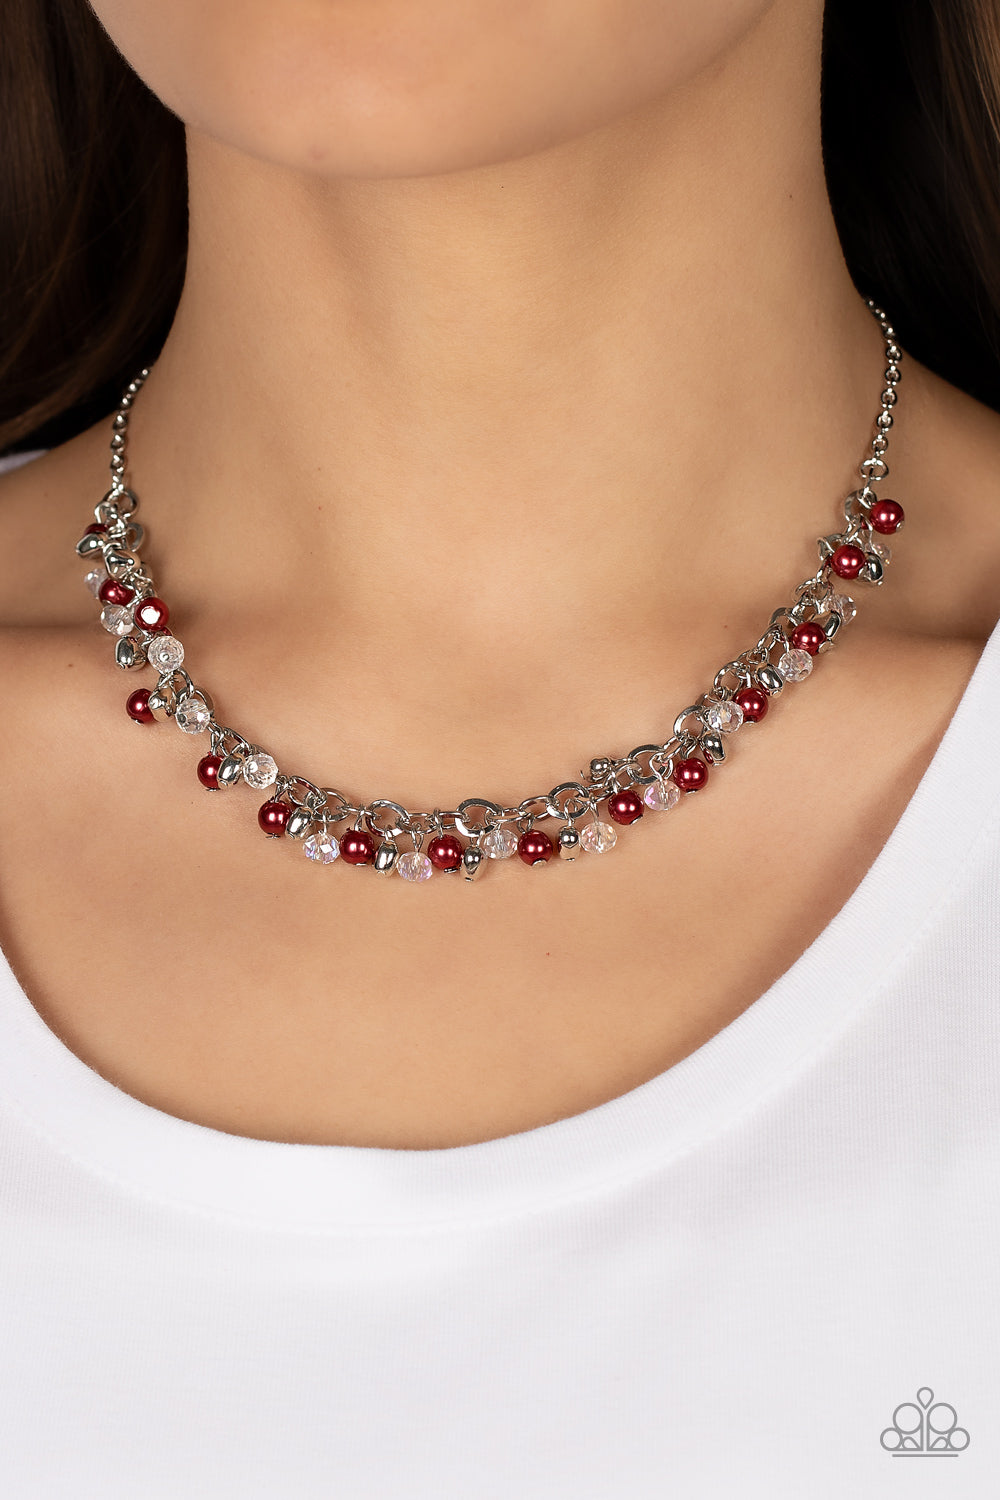 Soft-Hearted Shimmer - Red Pearls, White Accents, & Silver Heart Paparazzi Necklace & matching earrings